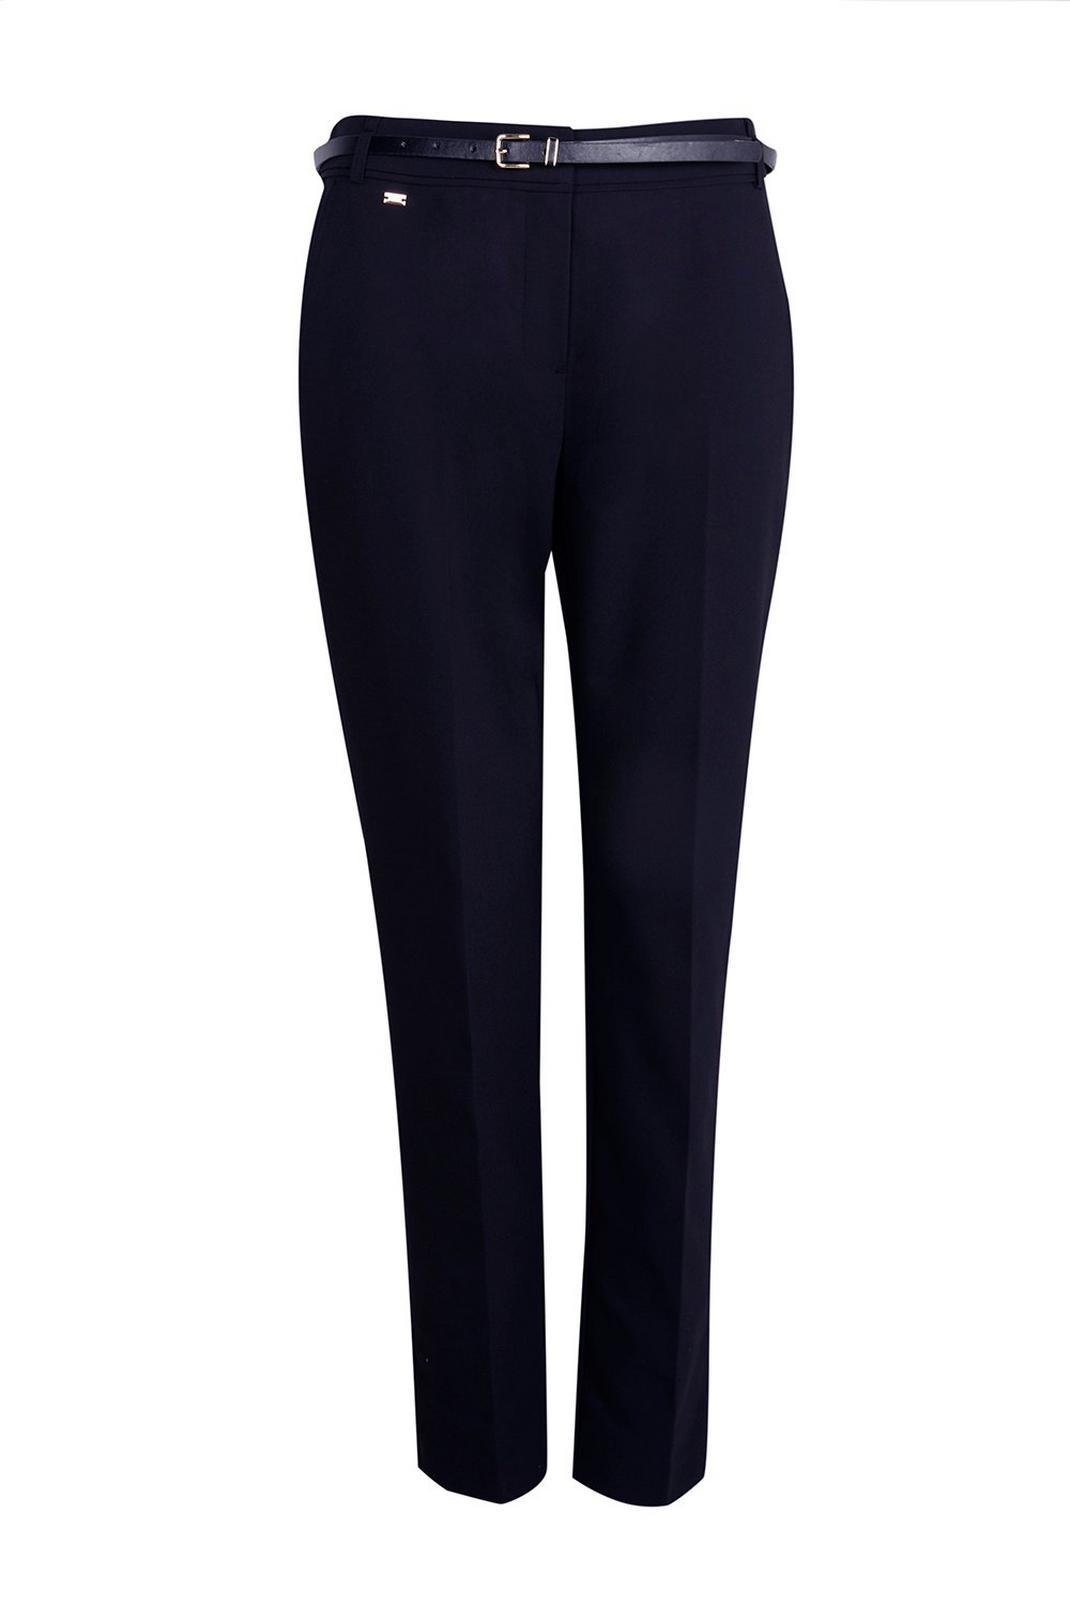 148 TALL Navy Belted Cigarette Trouser image number 2